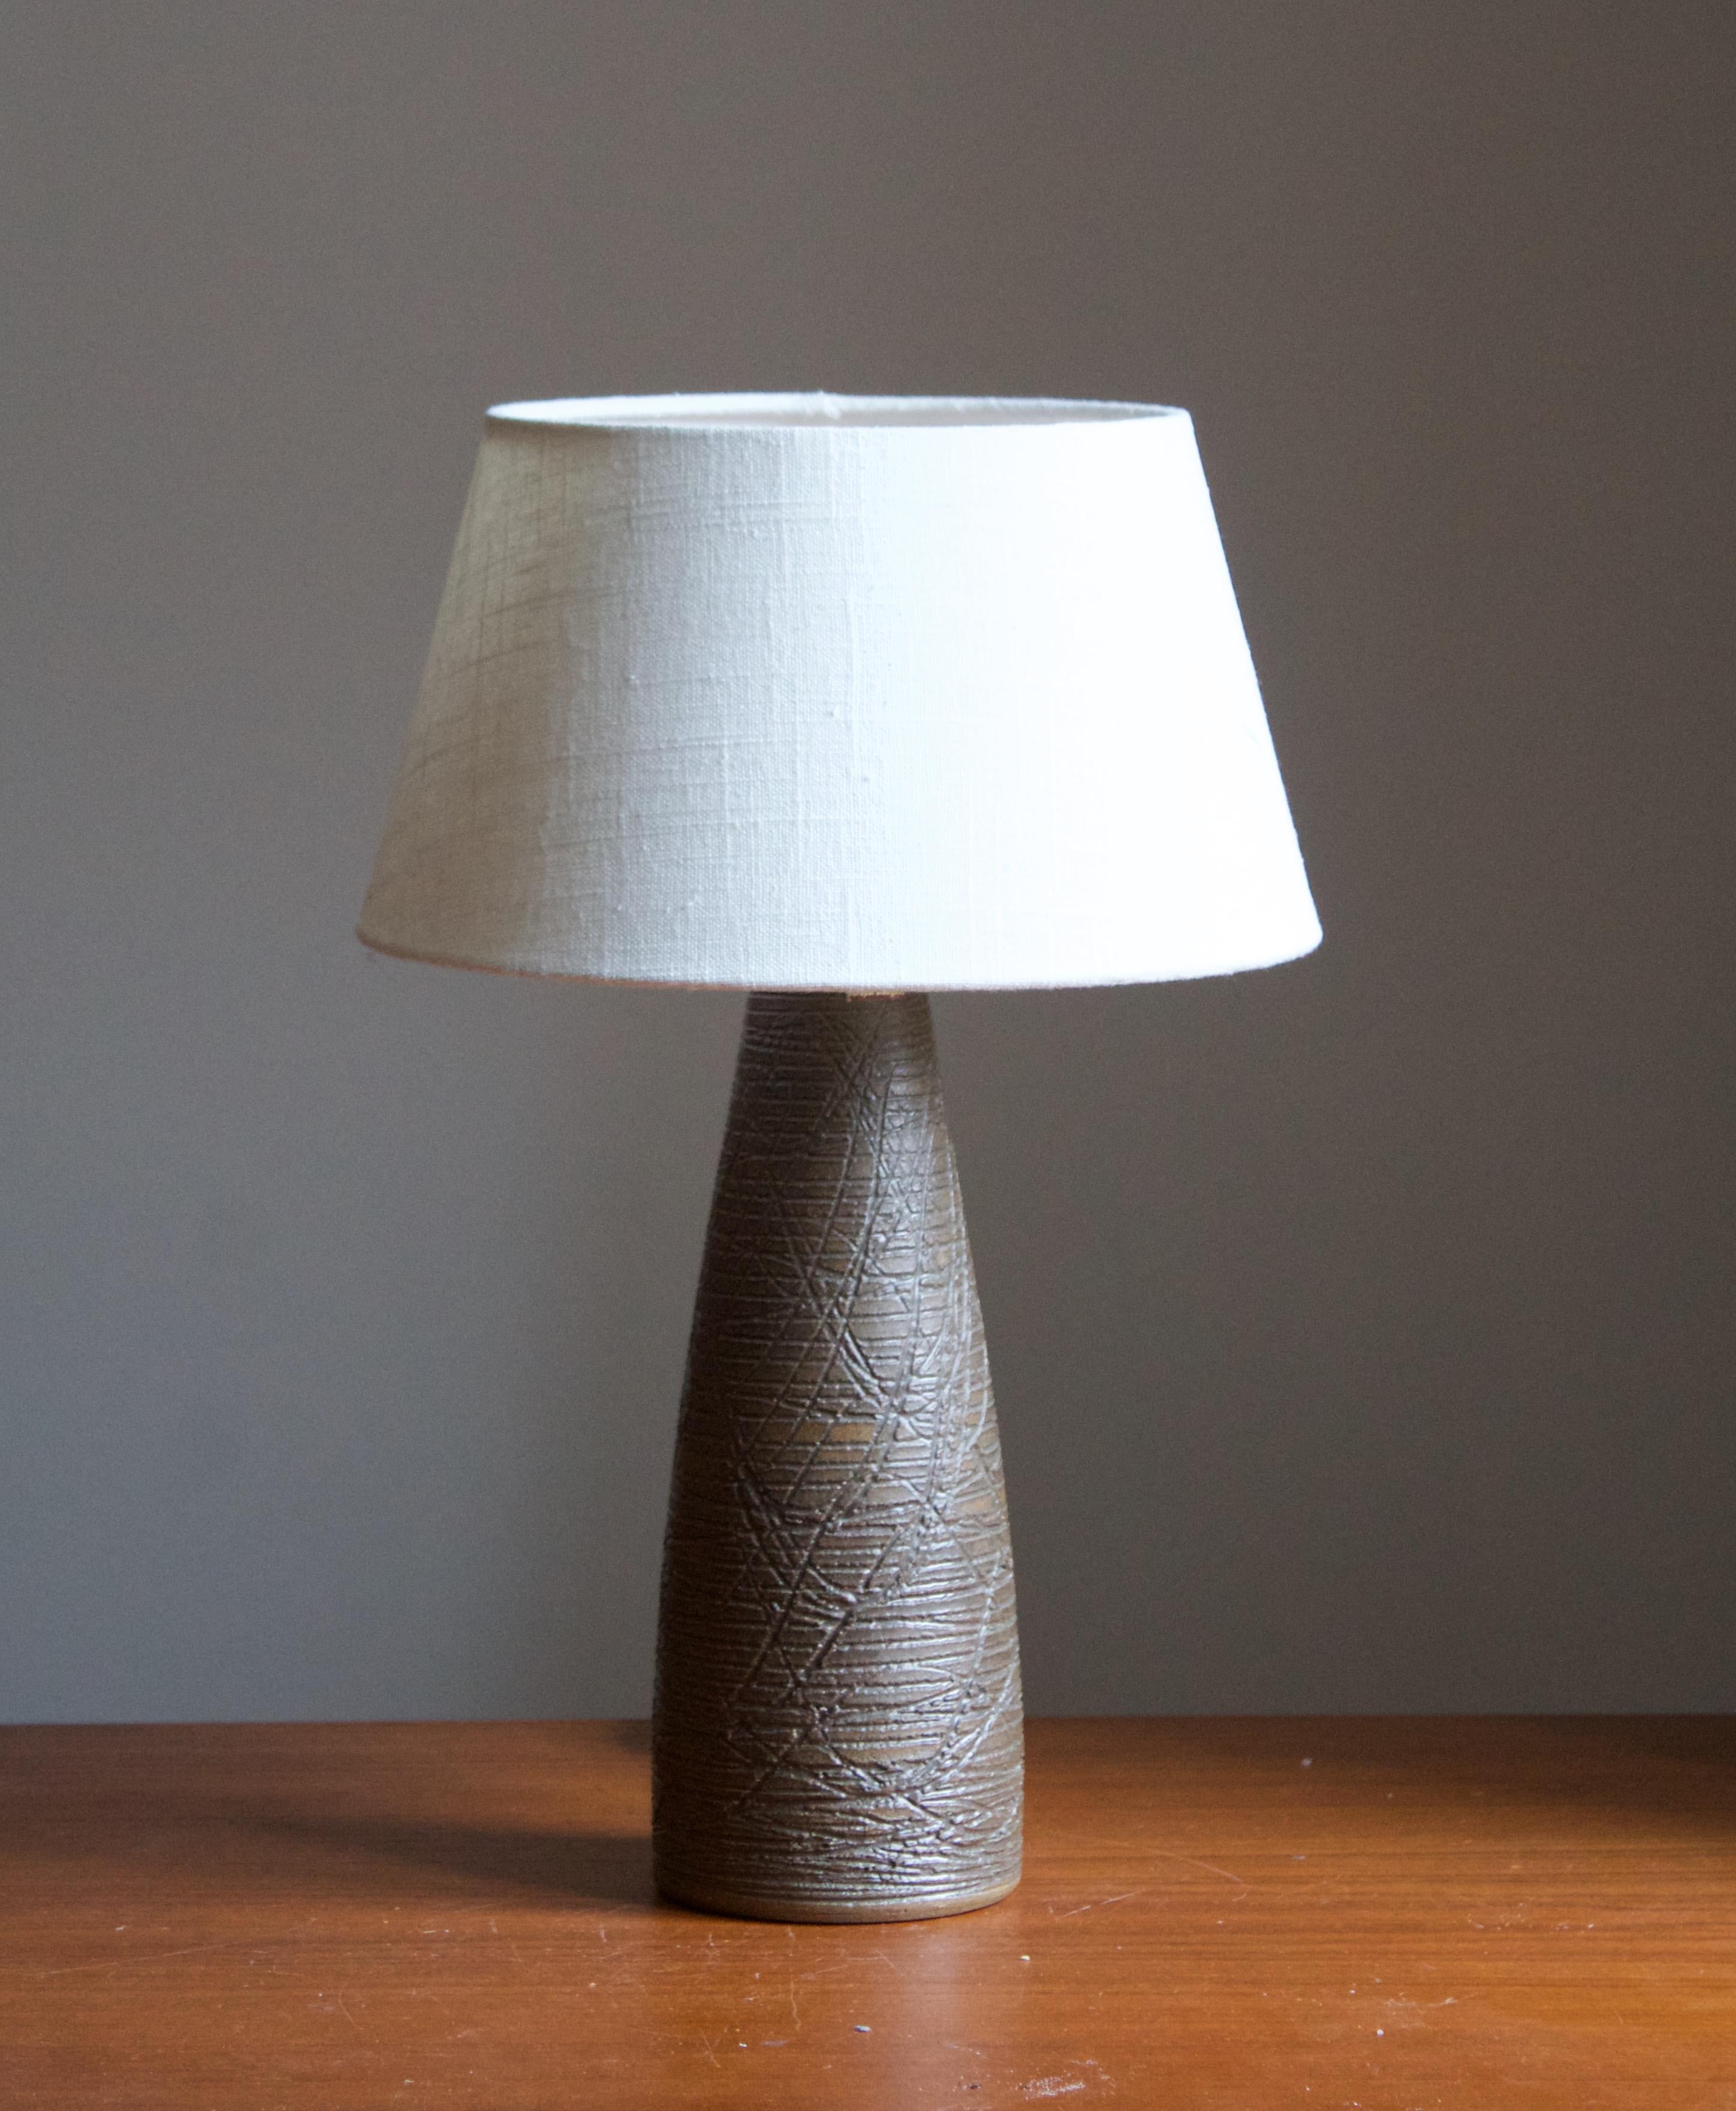 A table lamp produced by Danish ceramicist Aage Rasmus Selsbo in his studio, Simlångsdalen, Sweden, 1960s. Features Brown glaze and subtle incised decoration. Labeled and signed.

Sold without lampshade. Stated dimensions exclude lampshade, height